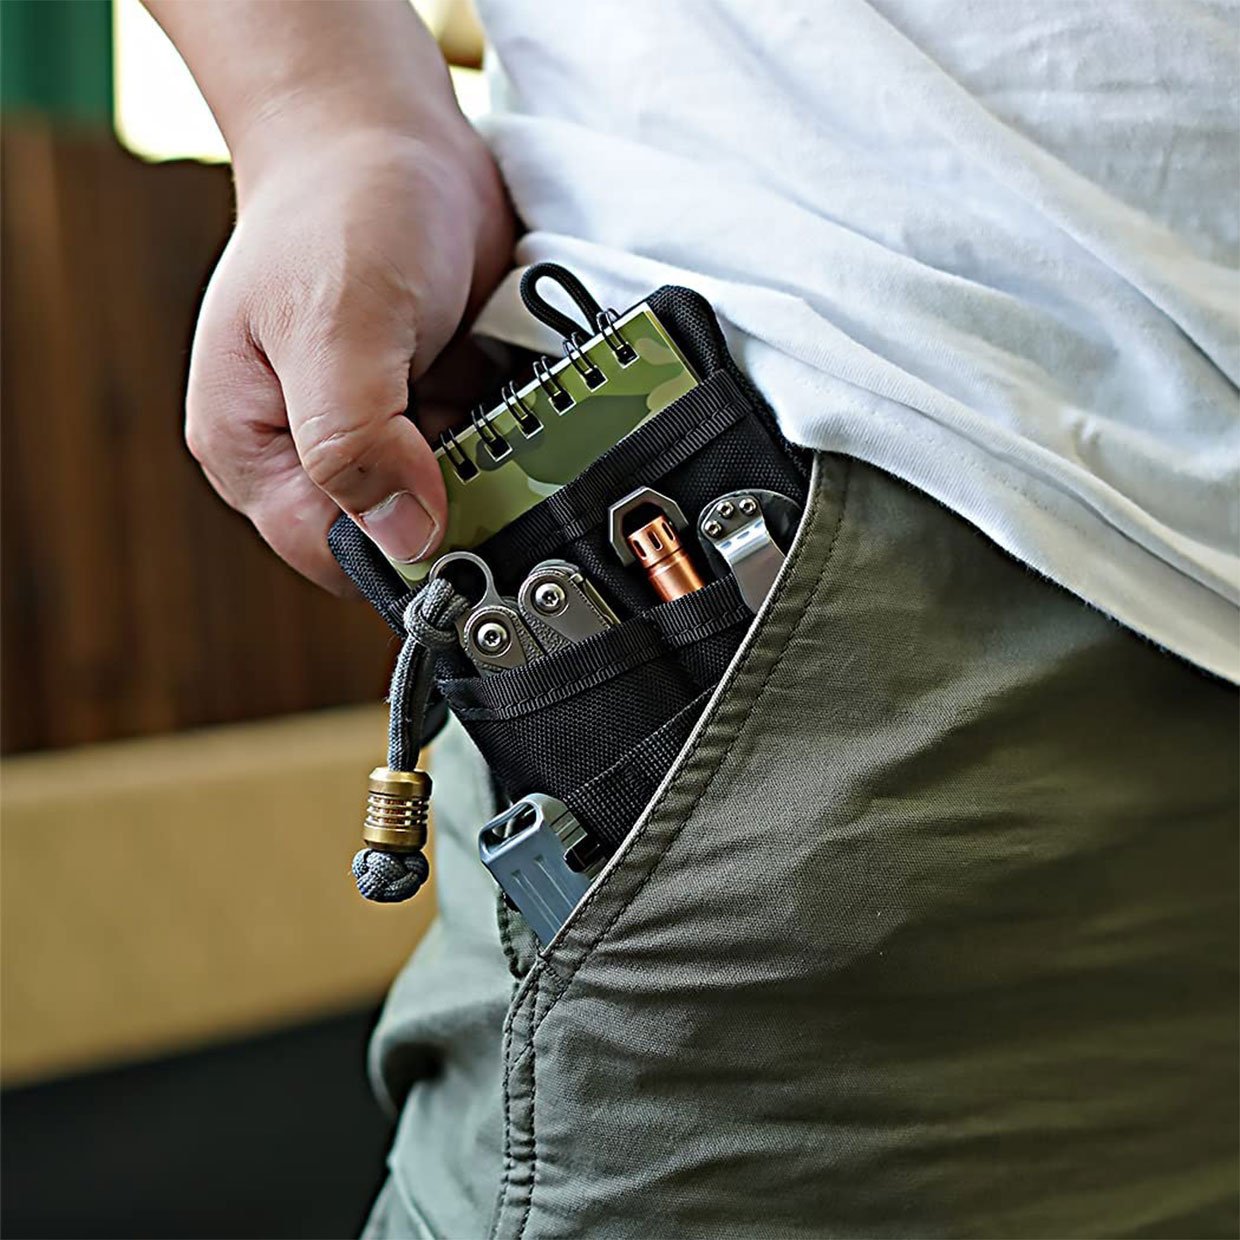 Viperade VE3 Tool Pouch